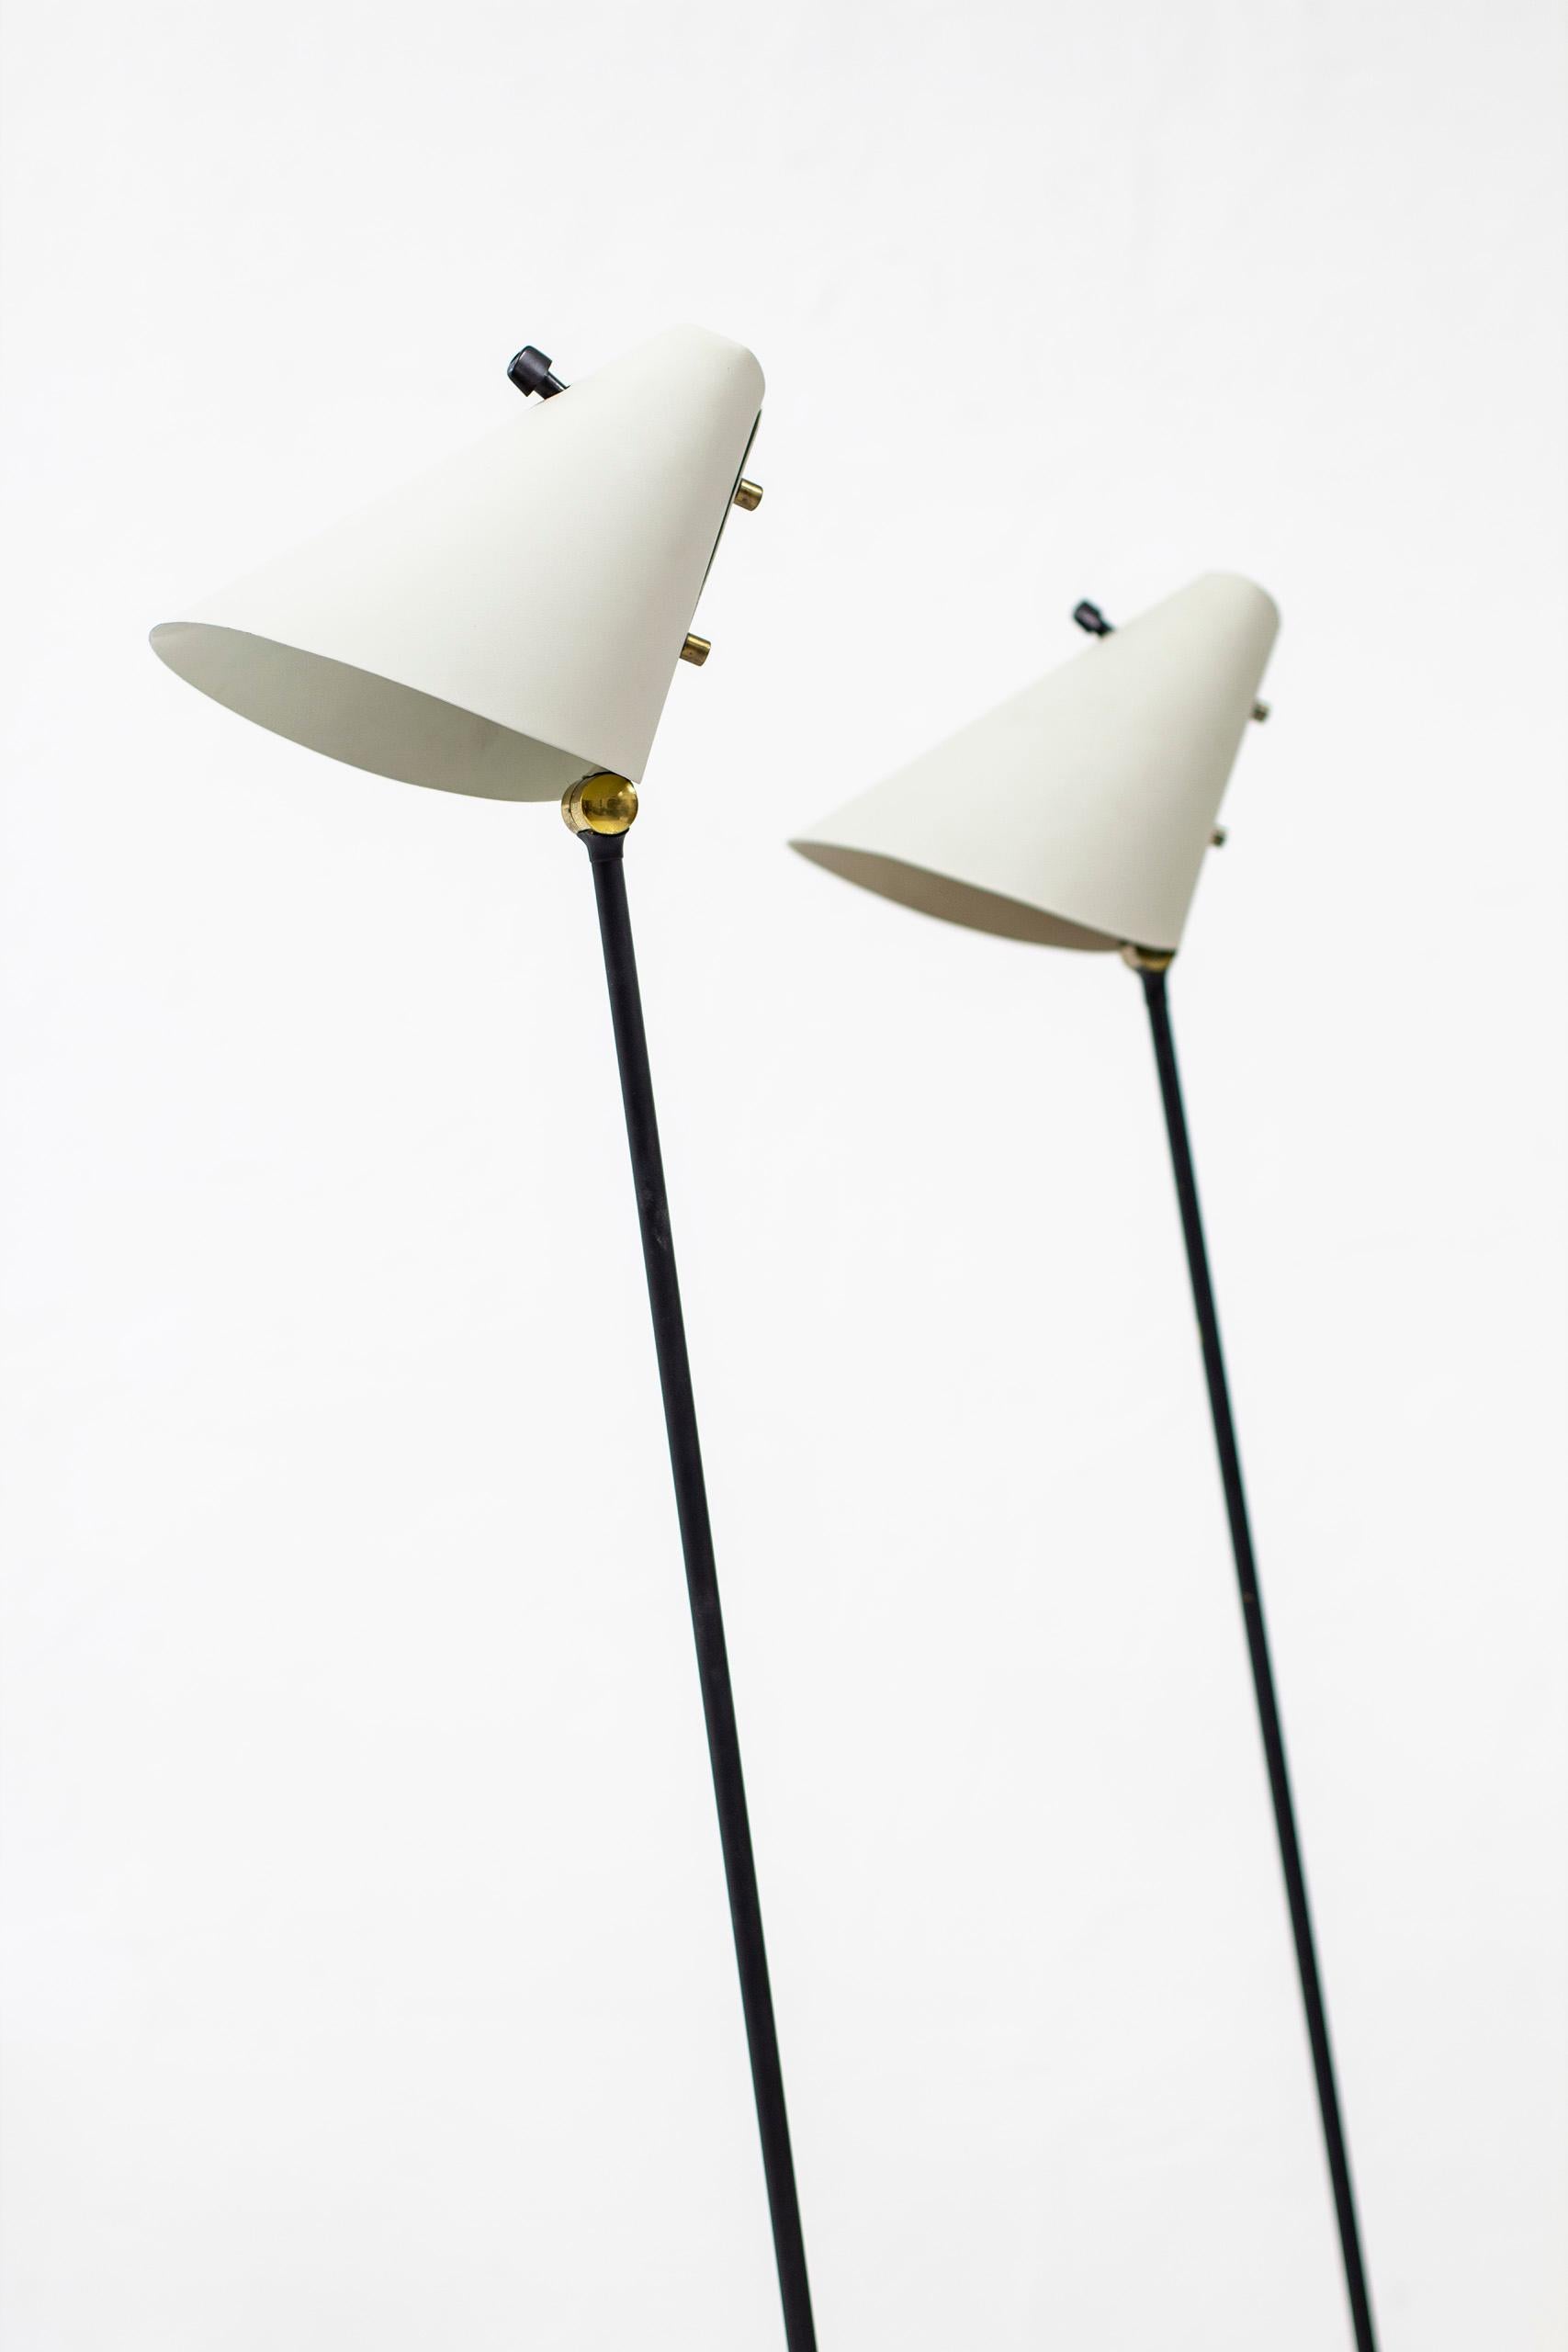 Swedish Rare and Early Floor Lamps Designed by Hans Agne Jakobsson, 1950s